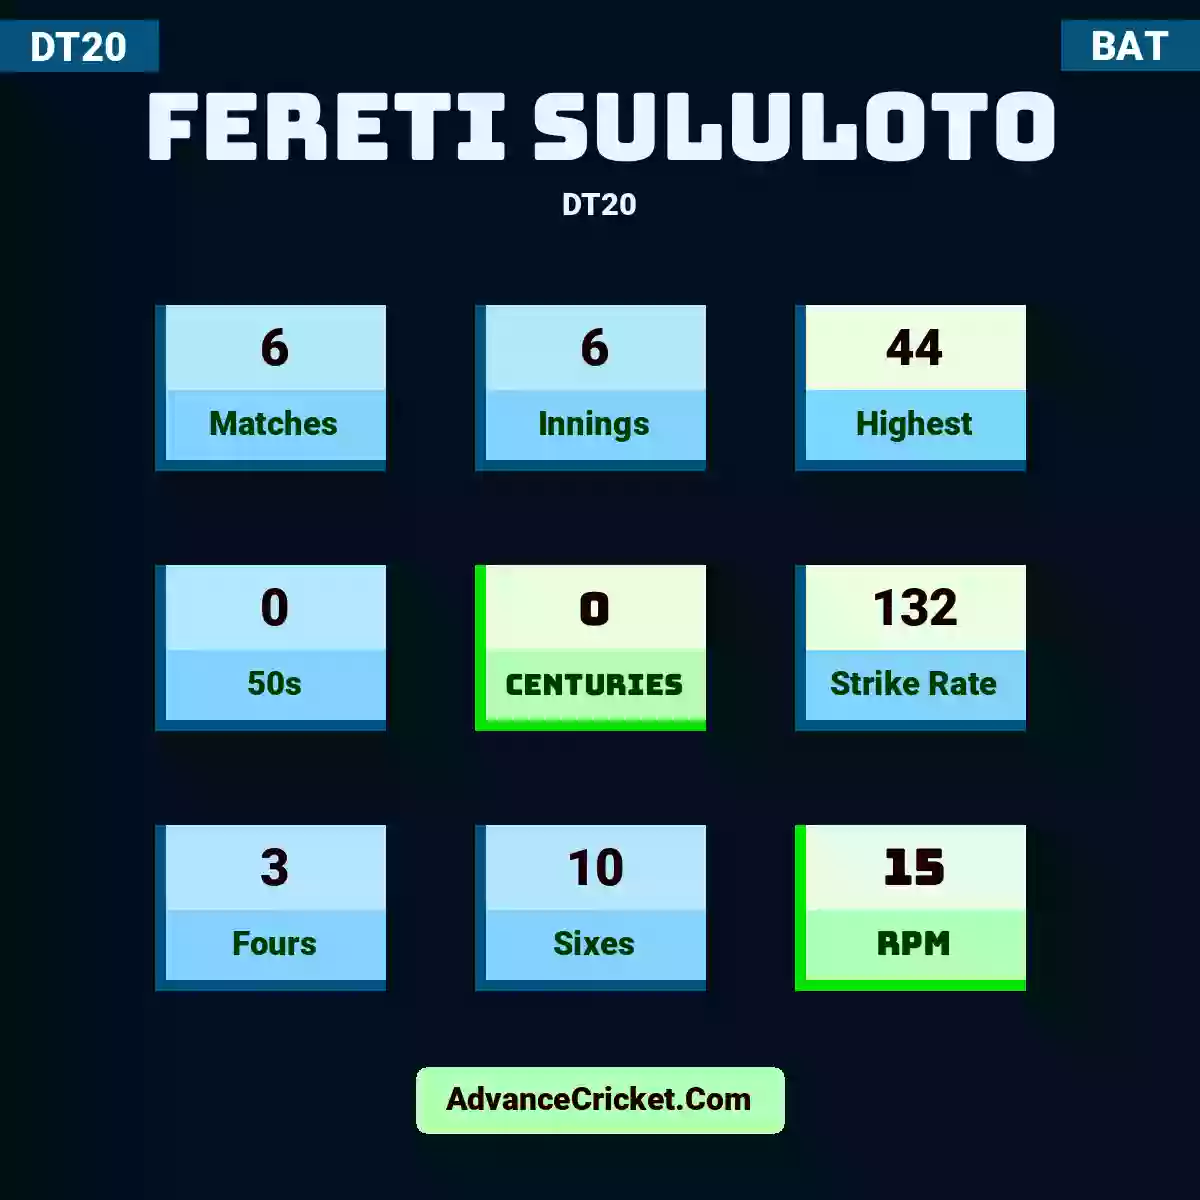 Fereti Sululoto DT20 , Fereti Sululoto played 6 matches, scored 44 runs as highest, 0 half-centuries, and 0 centuries, with a strike rate of 132. F.Sululoto hit 3 fours and 10 sixes, with an RPM of 15.